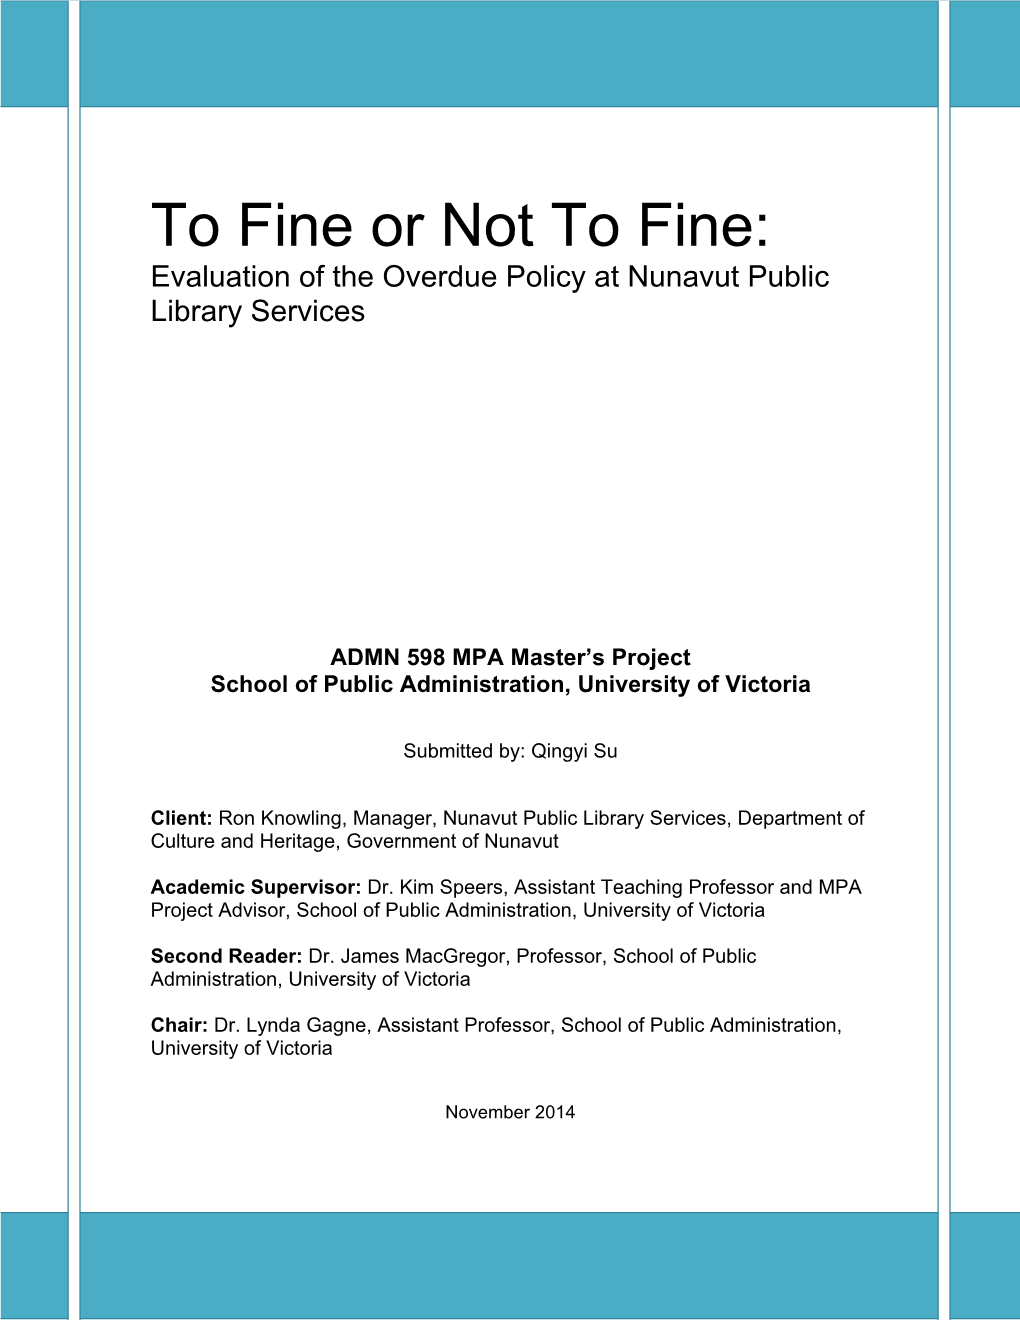 To Fine Or Not to Fine: Evaluation of the Overdue Policy at Nunavut Public Library Services